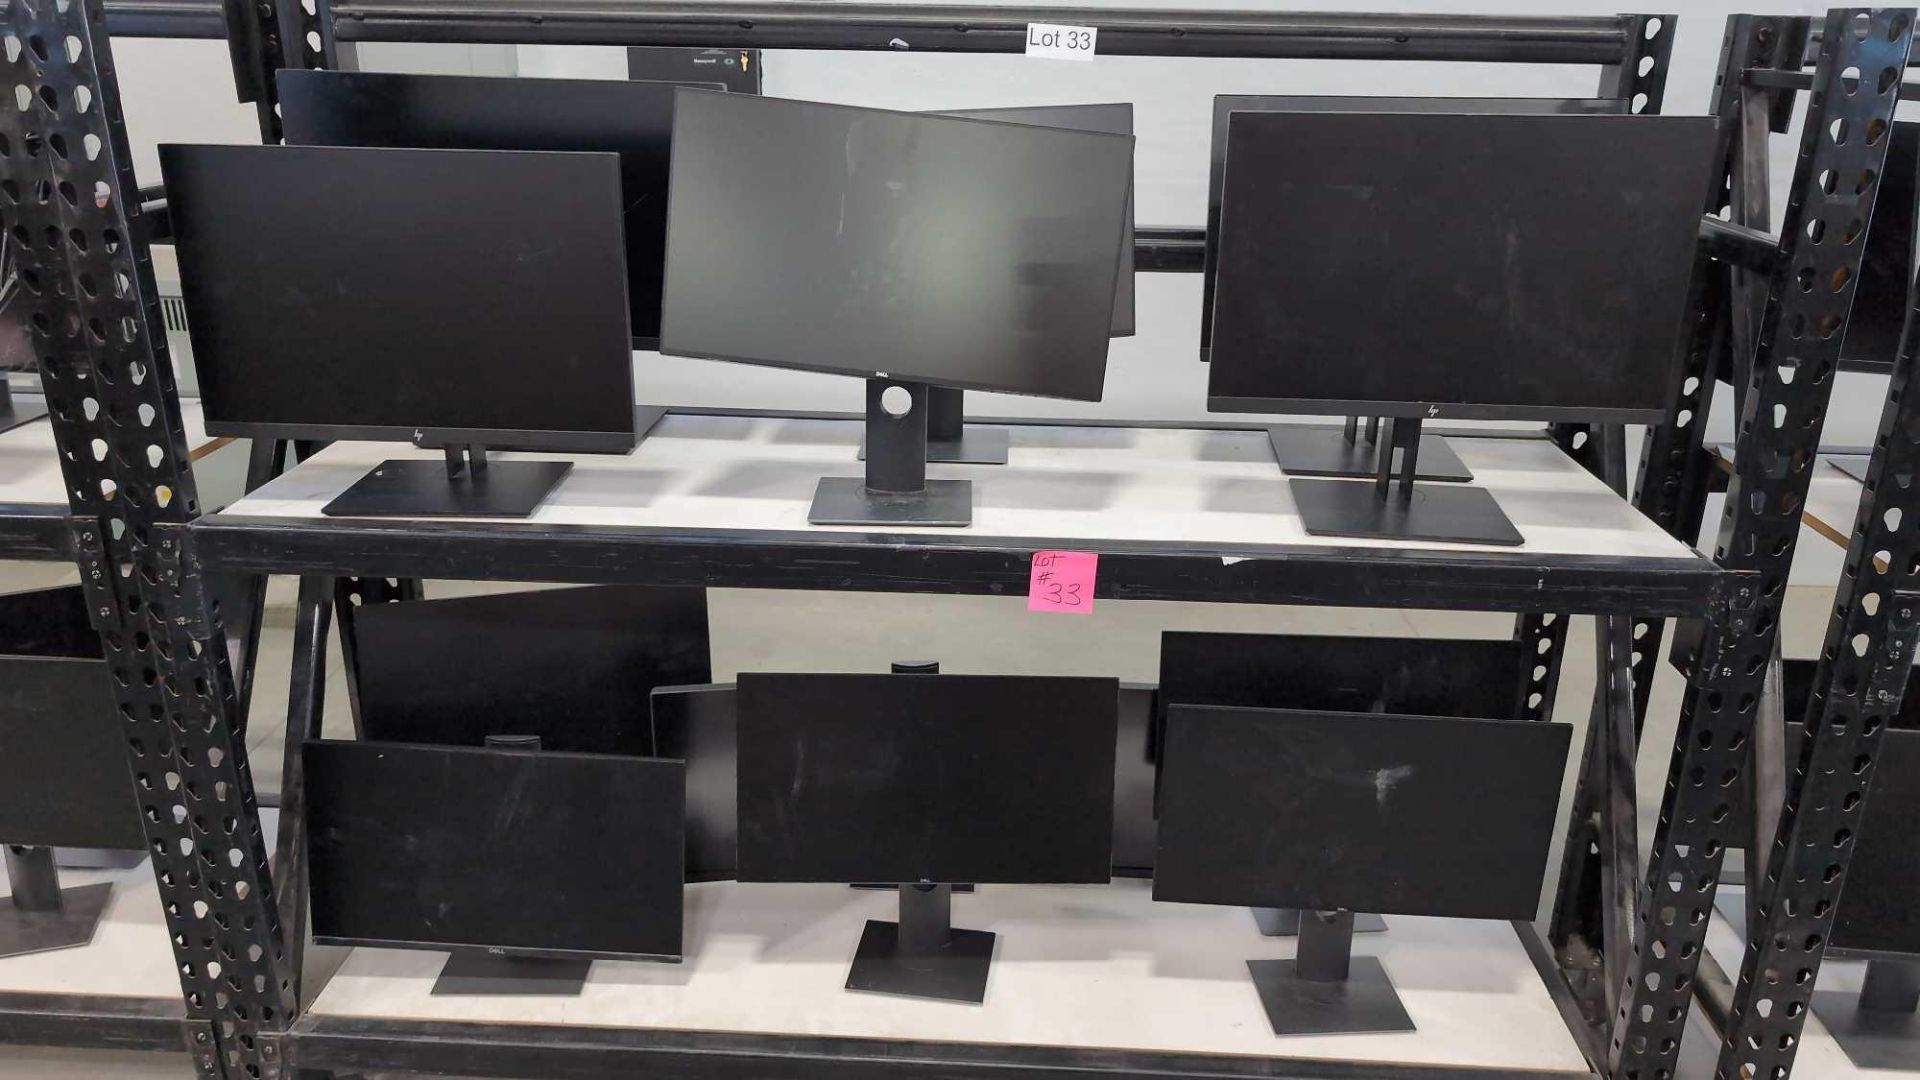 12 Dell Computer Monitors, one curved